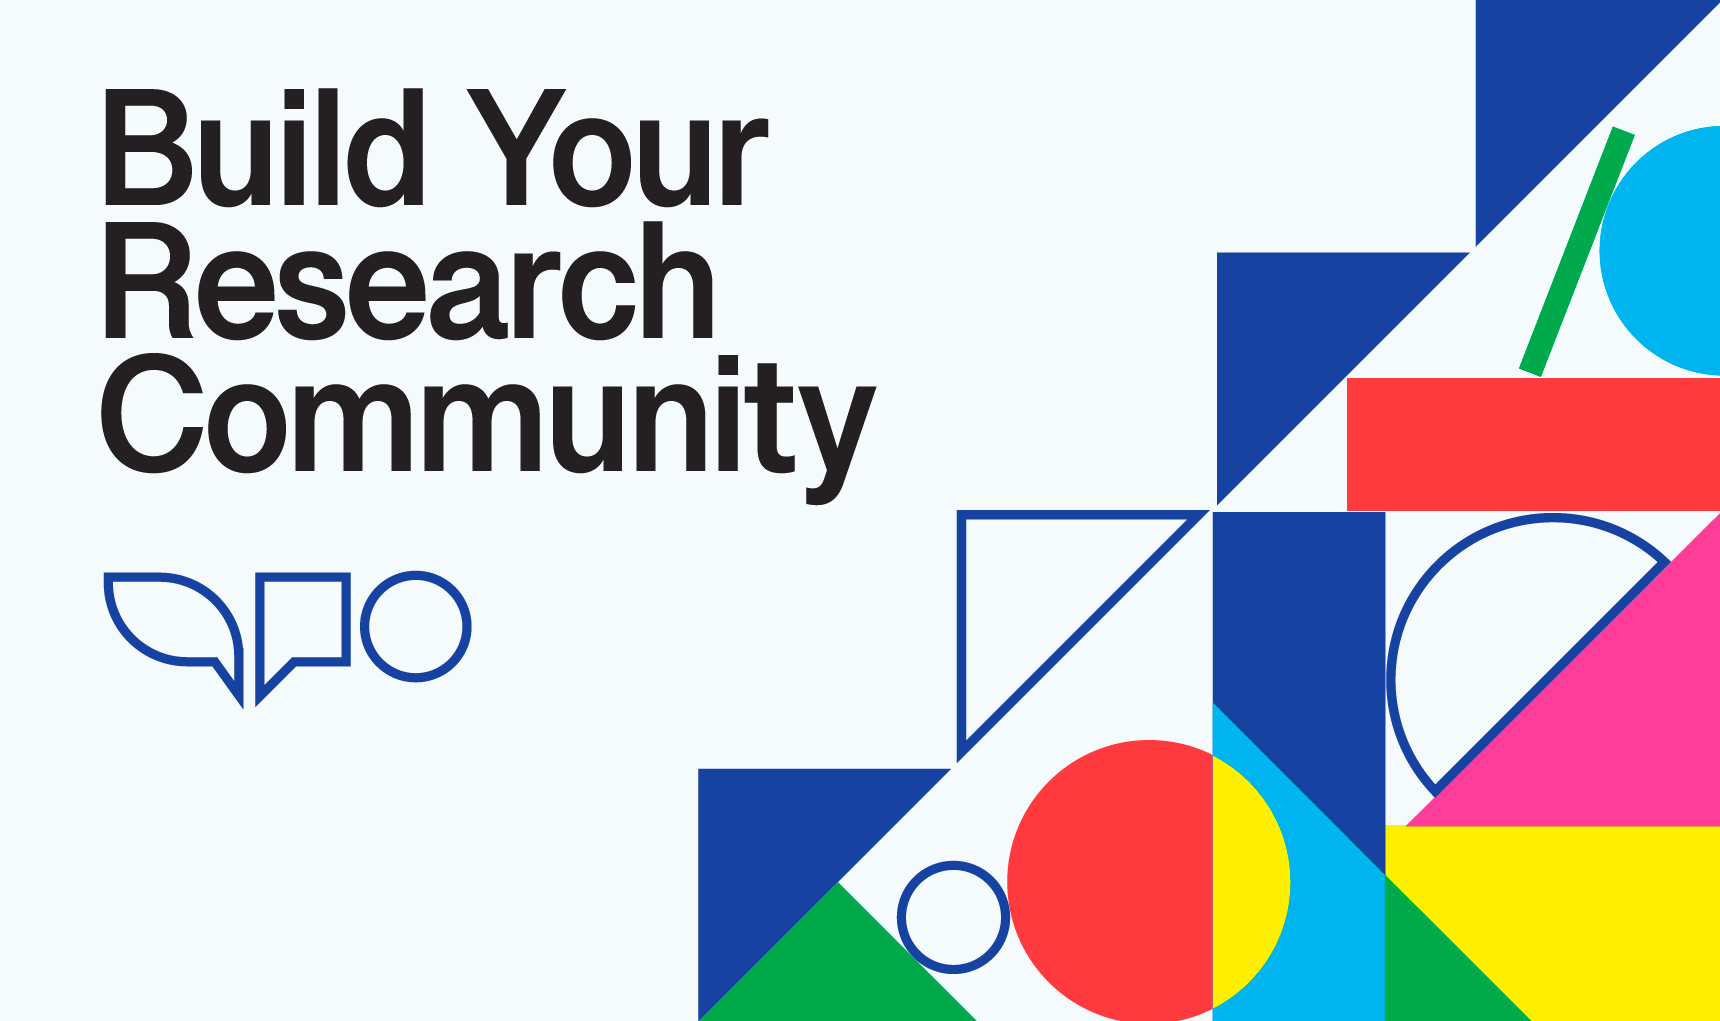 Build Your Research Community